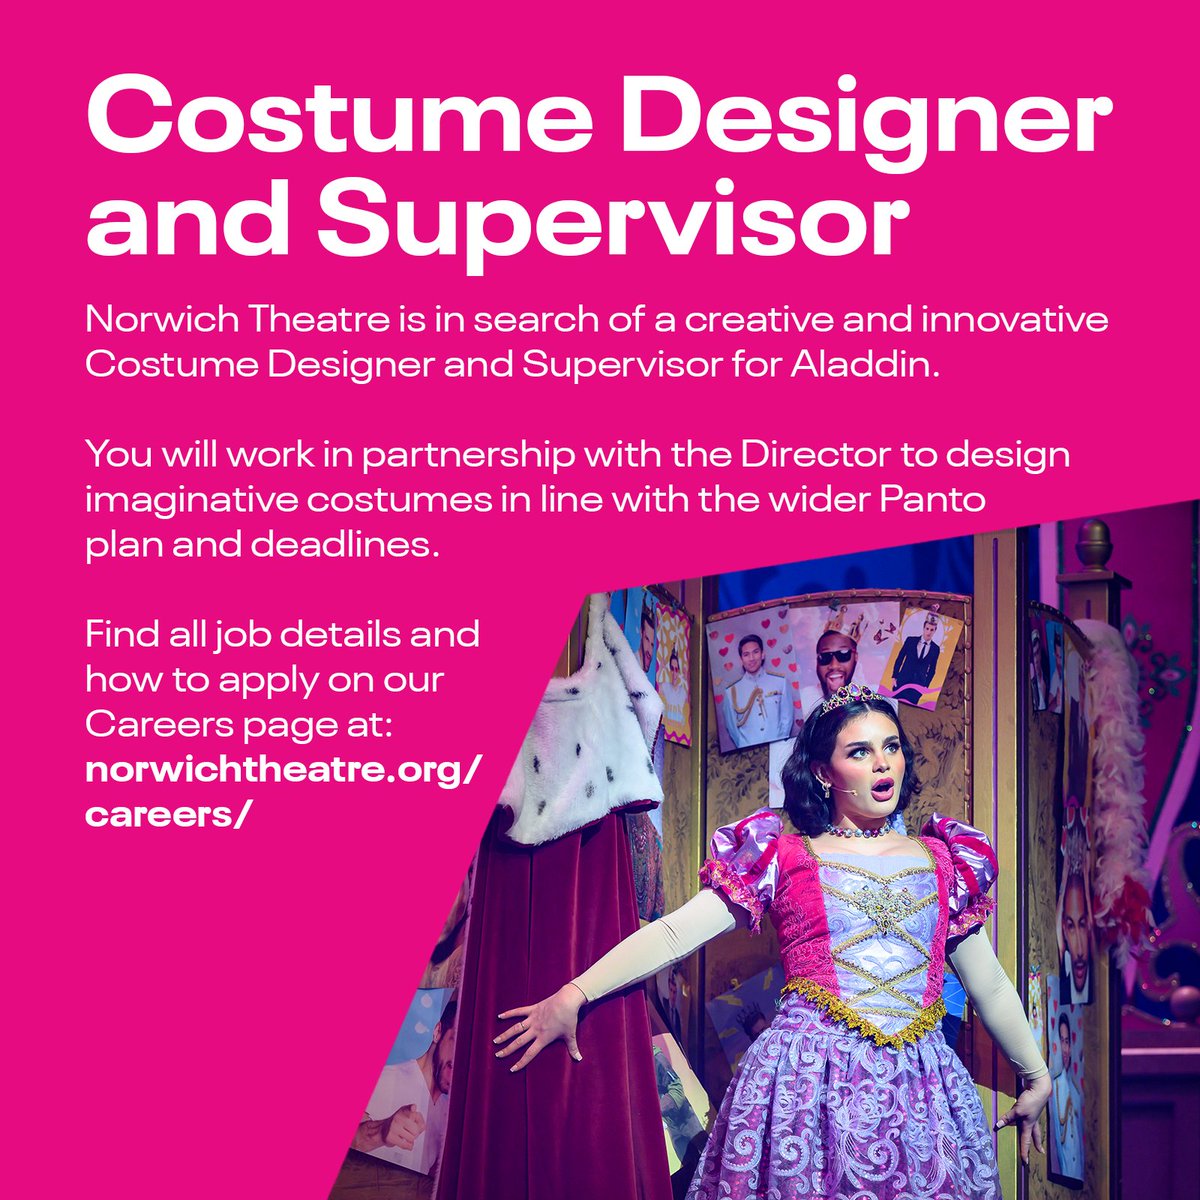 ‼️ Career opportunity ‼️ We are looking for a Costume Designer and Supervisor for this year's panto, Aladdin! All details about the job and how to apply can be found online. FIND OUT MORE HERE: pulse.ly/mhntobotfk